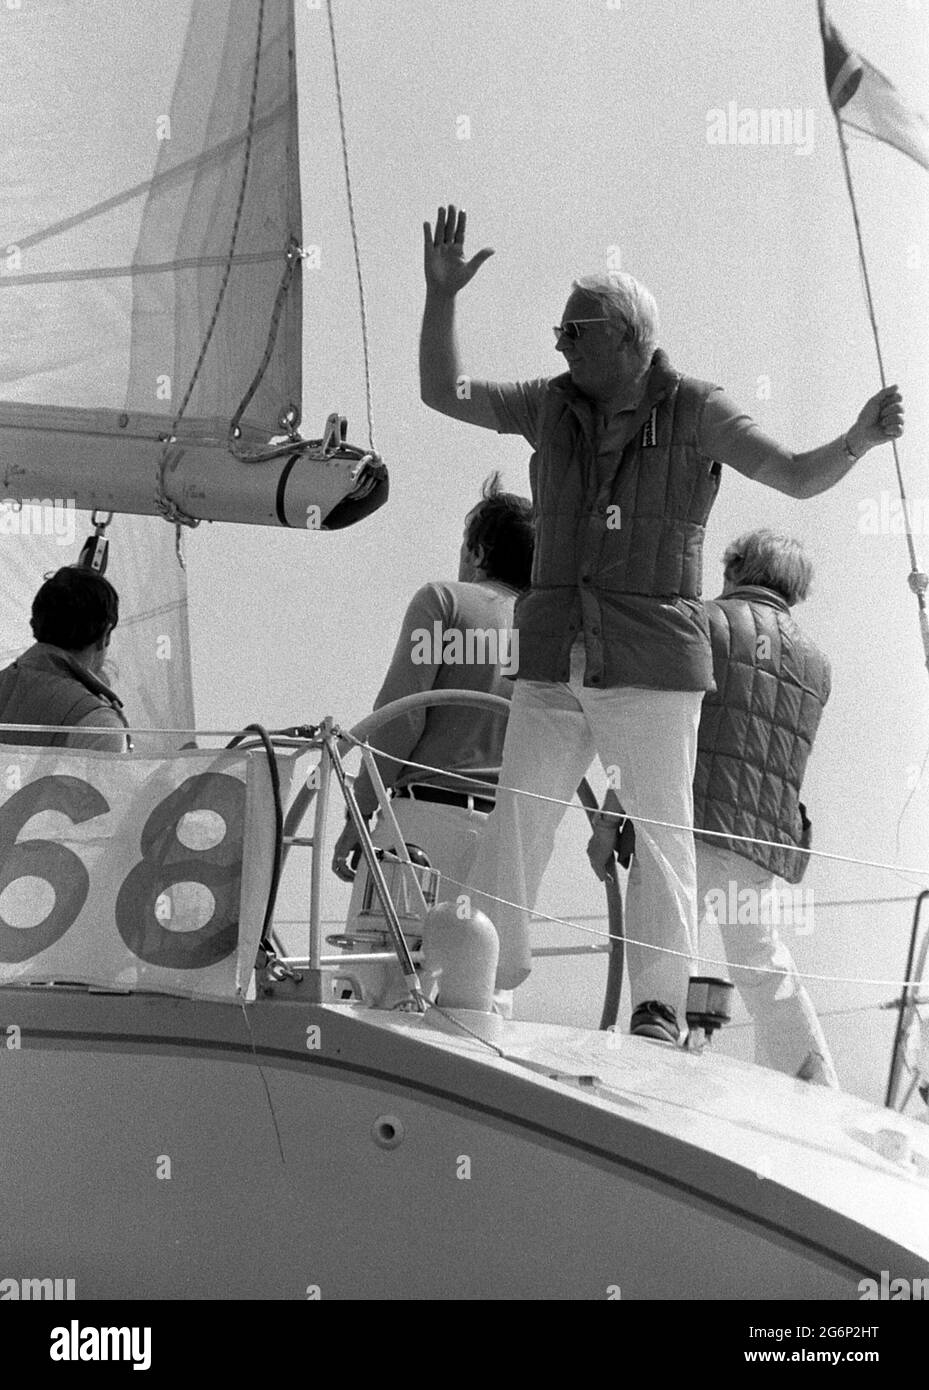 AJAXNETPHOTO. 7TH JULY,1979. SOLENT, COWES, ENGLAND. - KEEPING LOOKOUT - EDWARD HEATH STANDING LOOKOUT IN THE STERNSHEETS OF HIS YACHT MORNING CLOUD AT THE START OF THE COWES - DINARD OFFSHORE RACE WAVING TO SPECTATORS.  PHOTO:JONATHAN EASTLAND/AJAX REF:2790707 18 18 Stock Photo